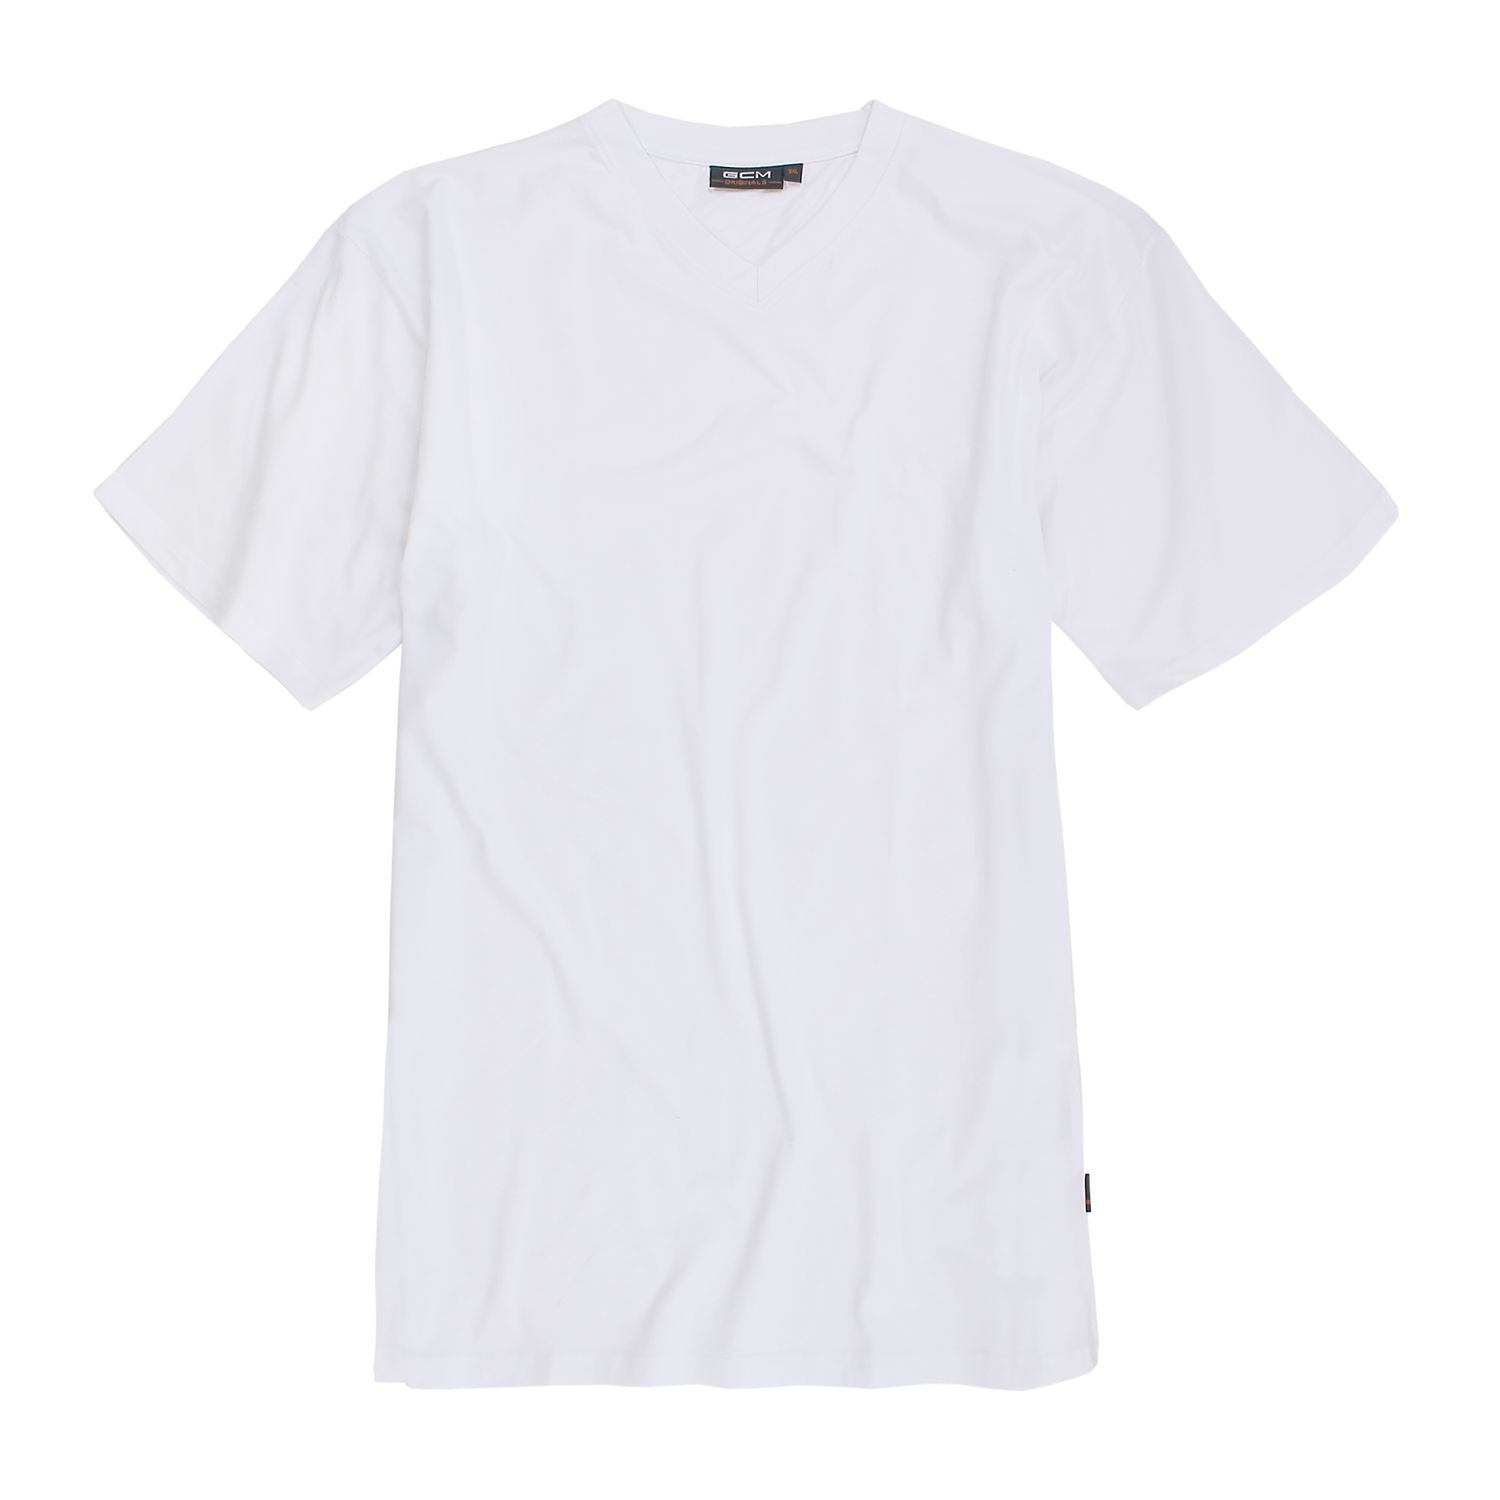 V-neck T-shirt in white by GCM Originals up to oversize 6XL